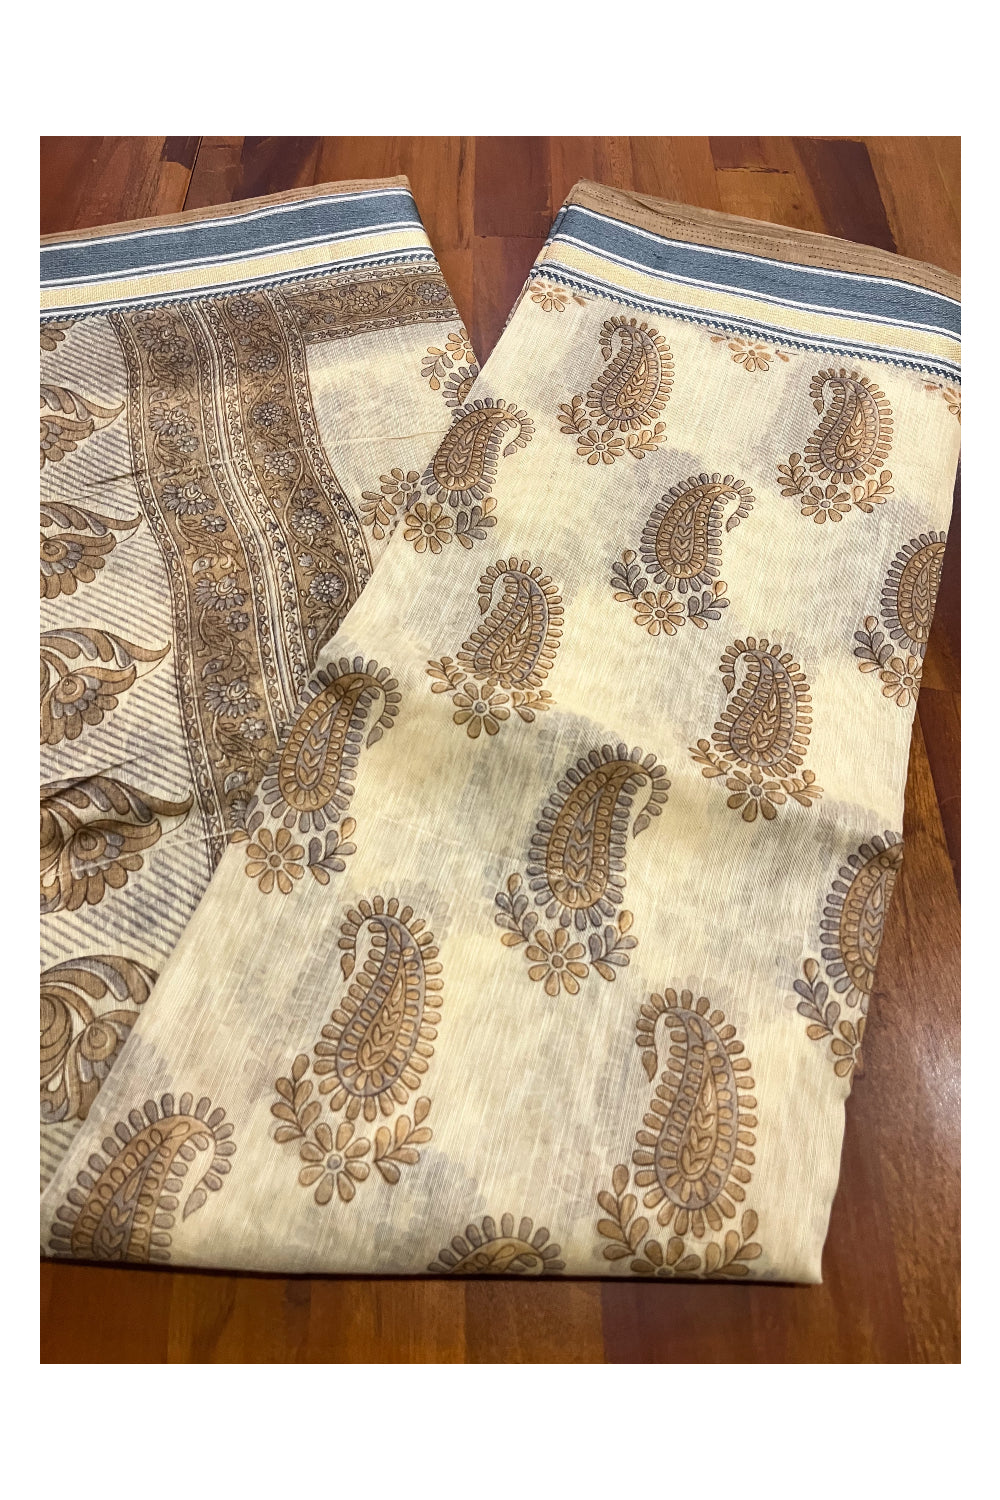 Southloom Cotton Light Brown Saree with Paisley Printed Designs